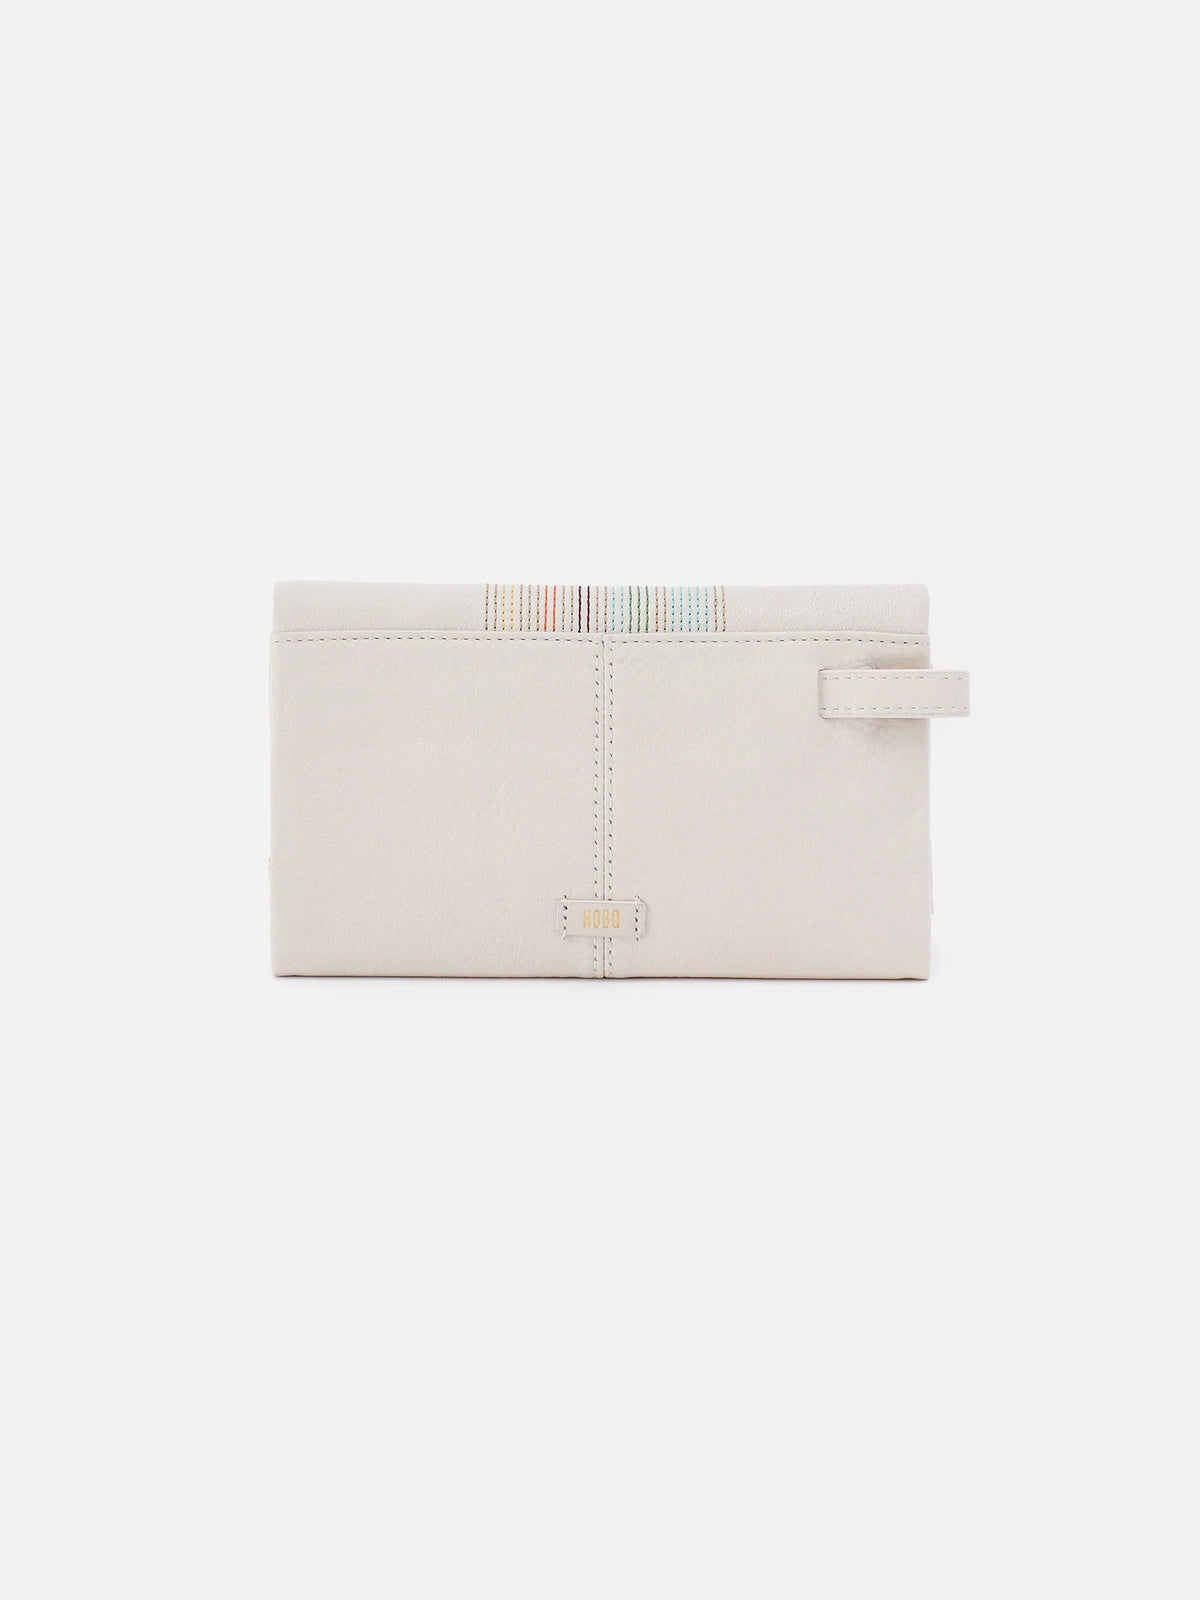 hobo keen pebbled leather stitch wallet in mutli white